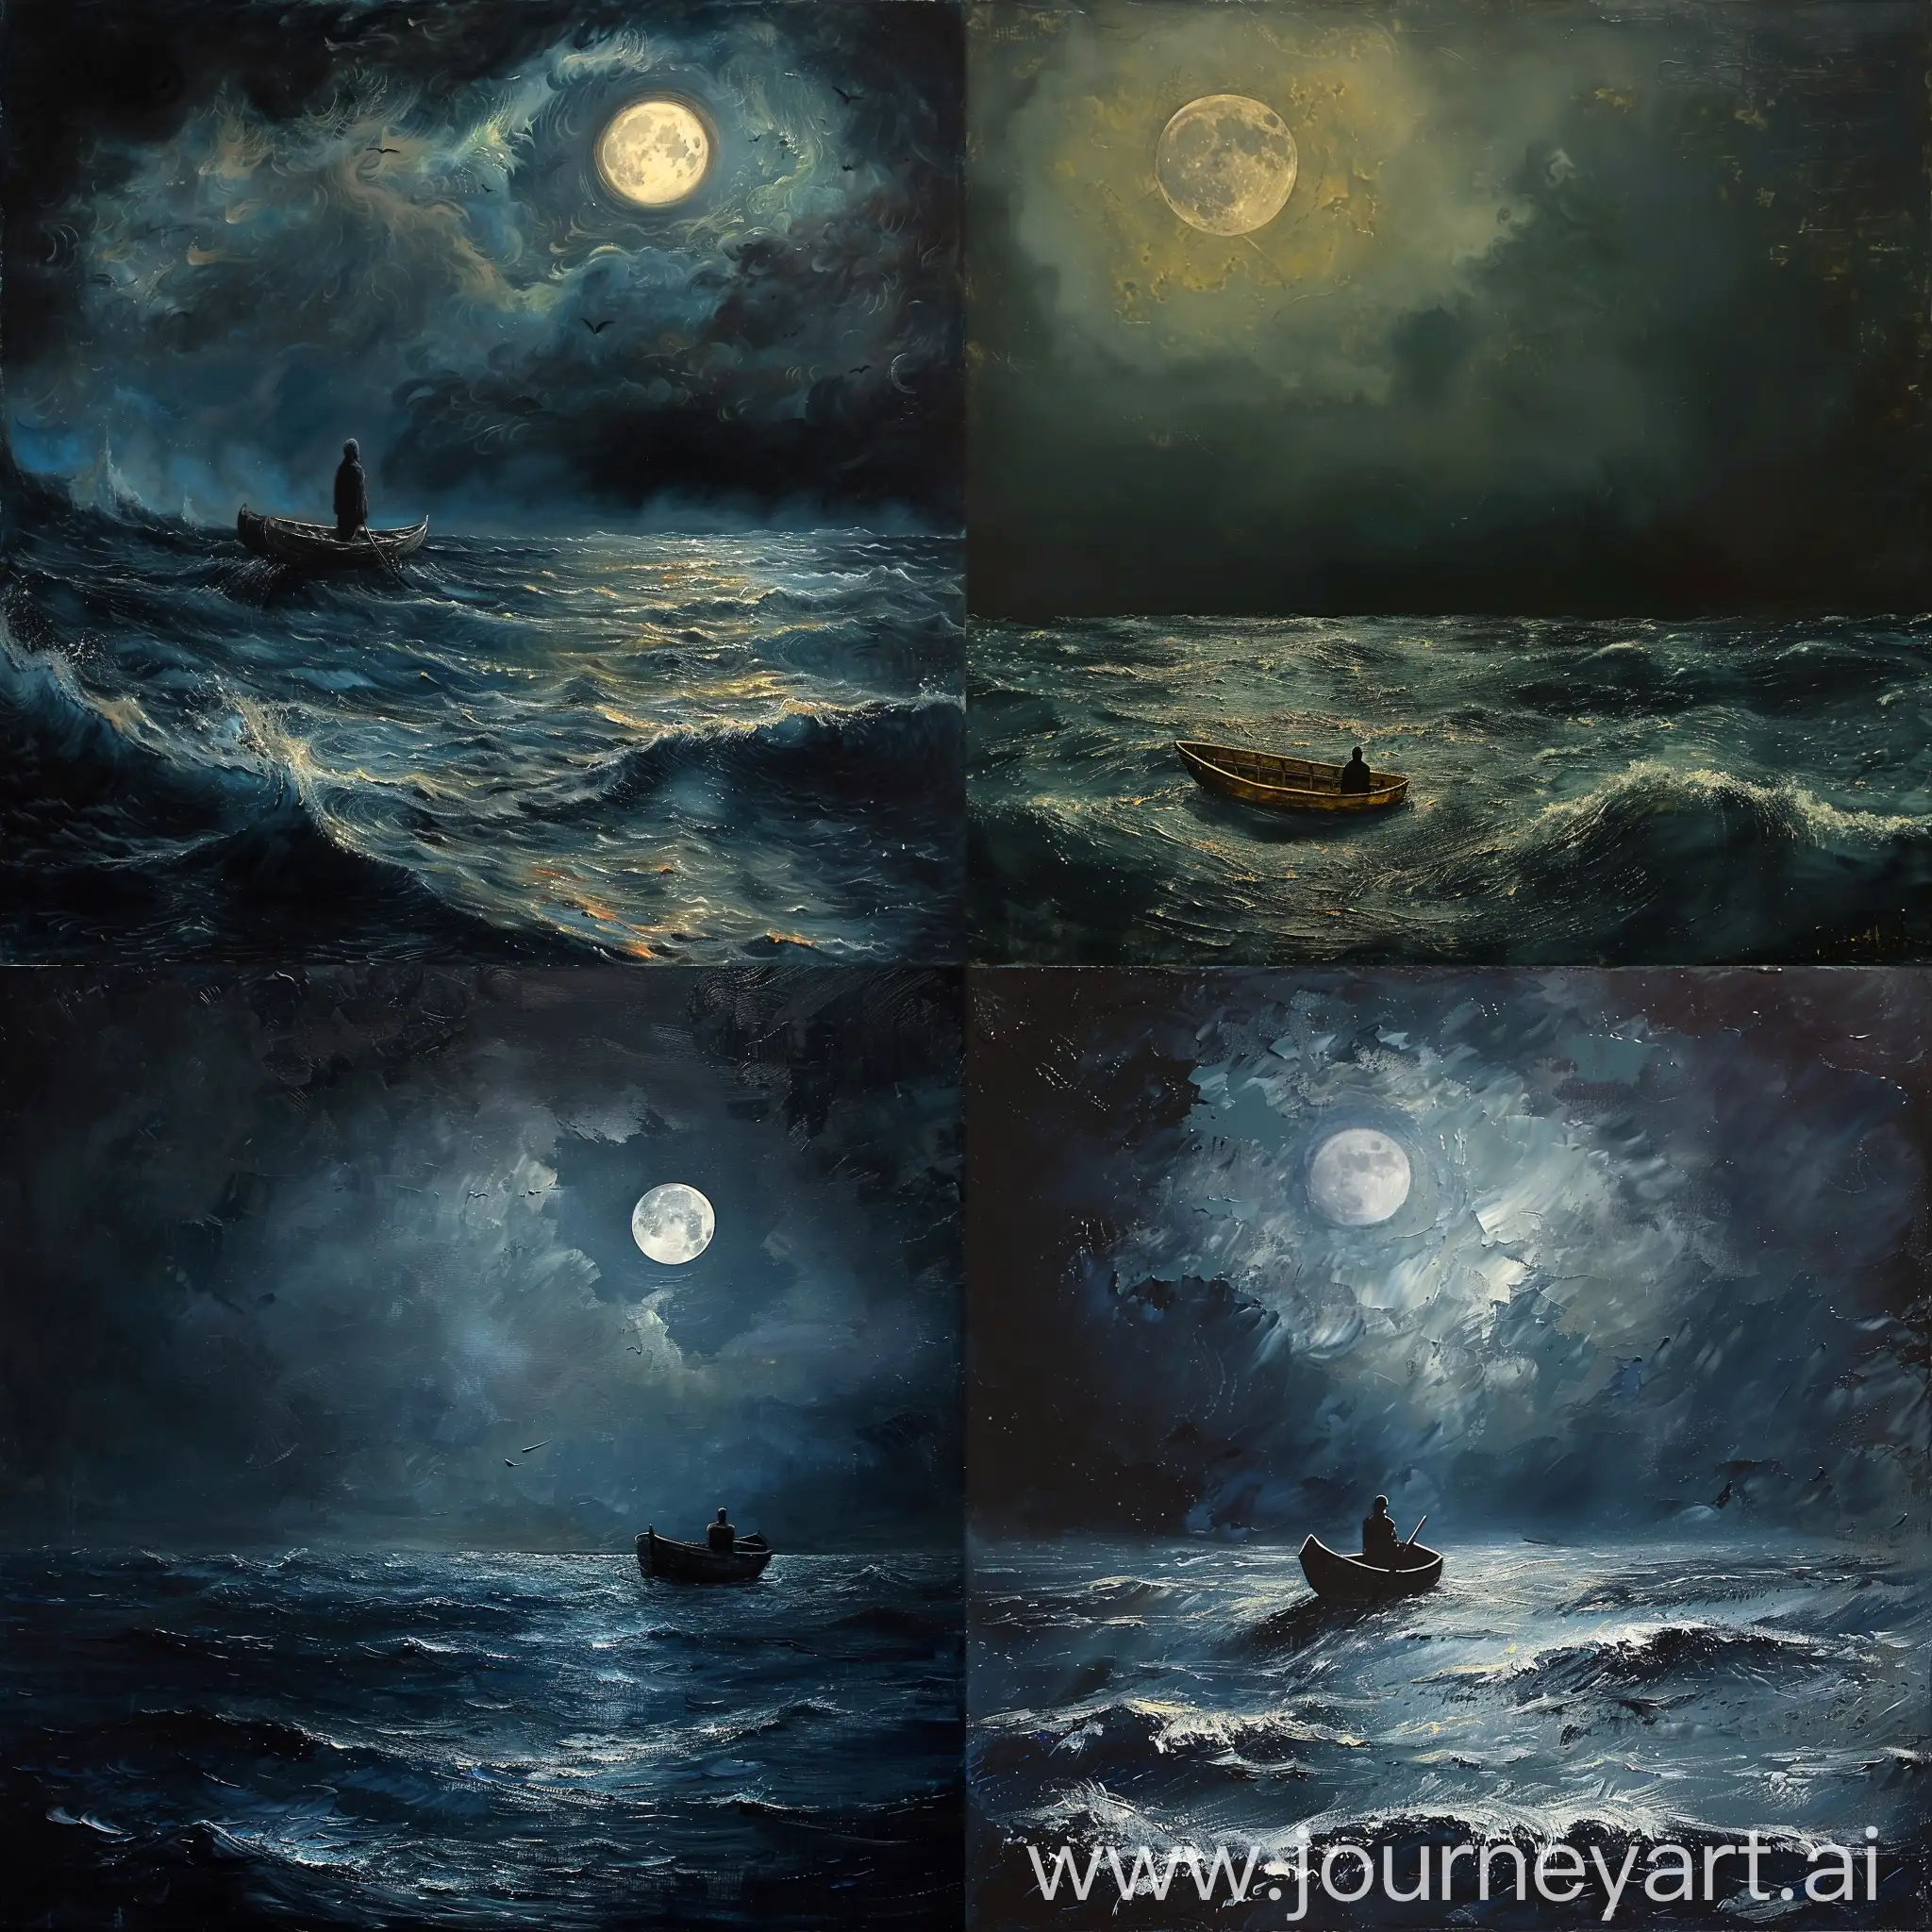 a painting of a man in a boat alone, in the middle of a dark stormy ocean, facing the moon